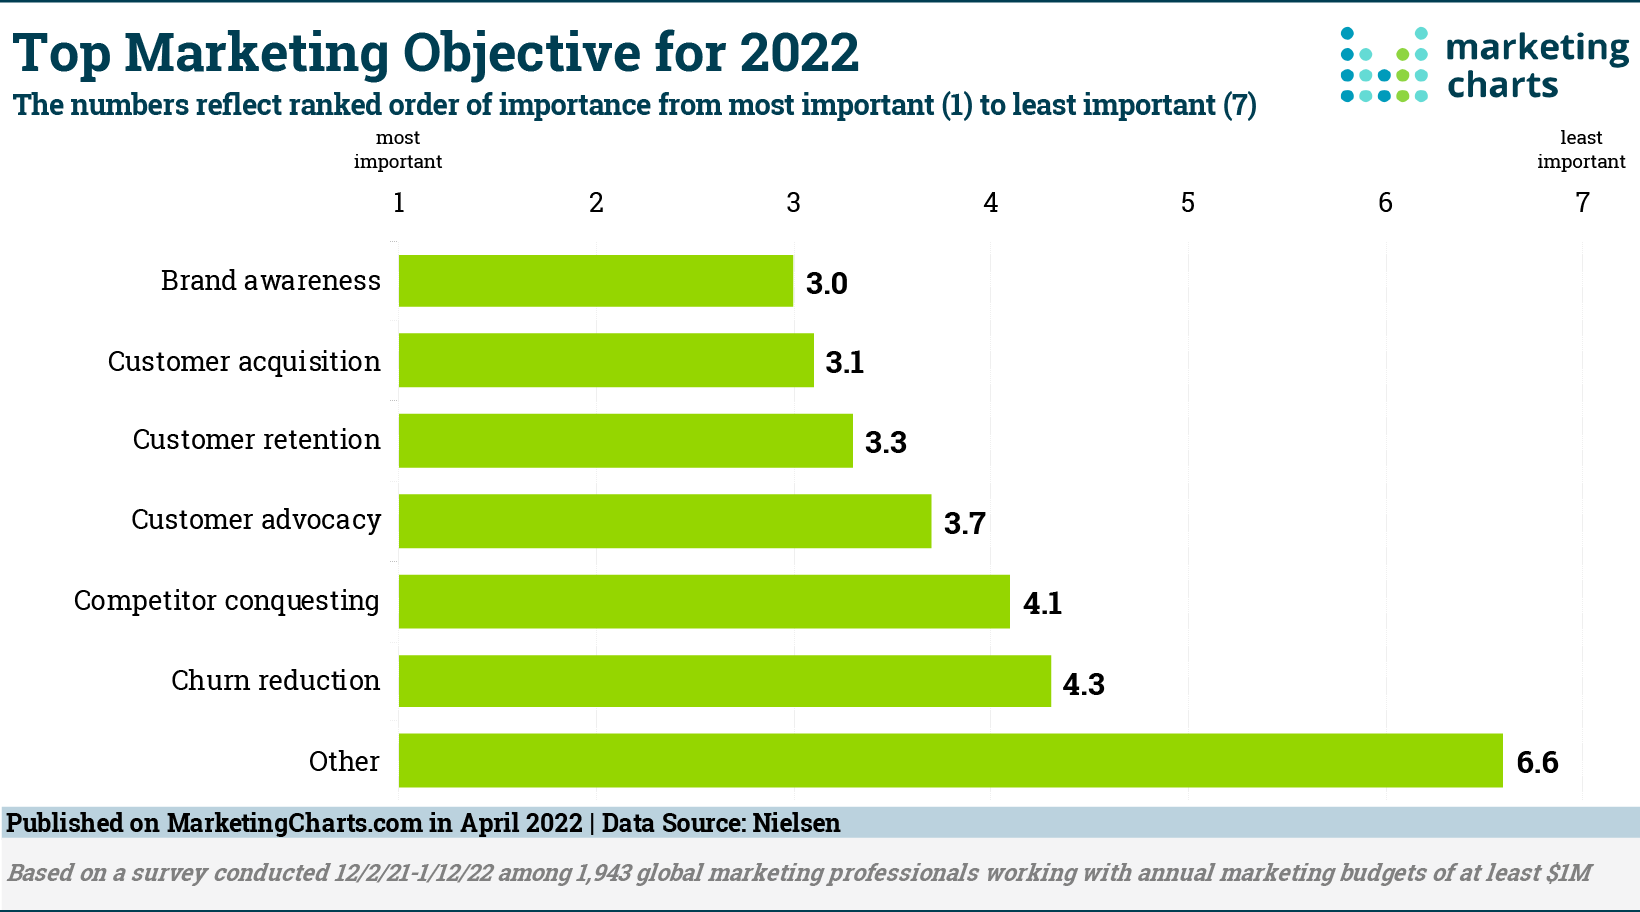 Top Marketing Objectives for 2022